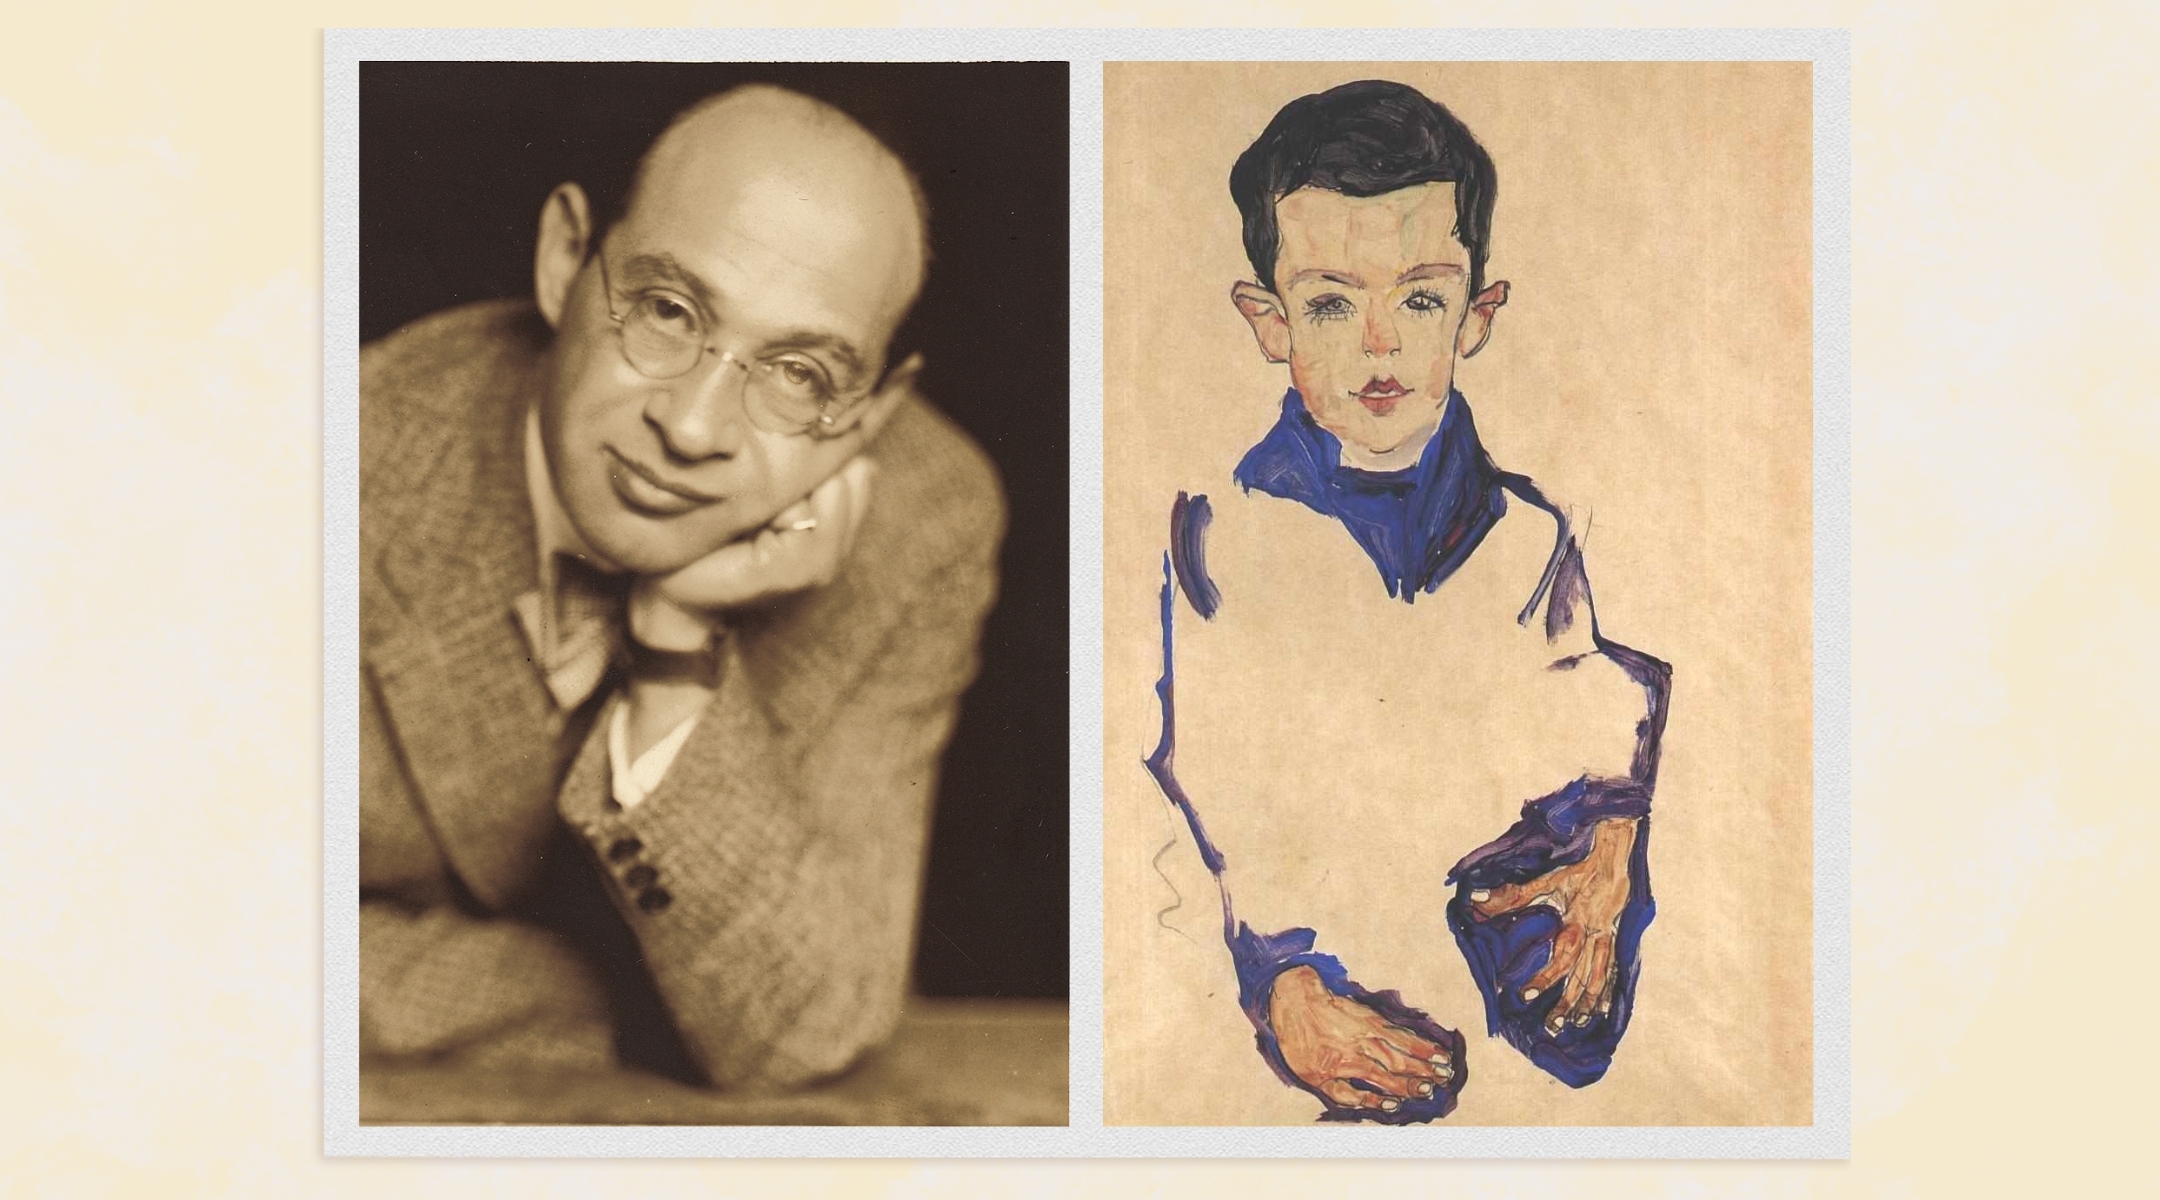 Fritz Grünbaum, left, was a Viennese Jewish cabaret performer with a vast Egon Schiele collection, including “Portrait of a Boy,” a preparatory study for the 1910 oil portrait of the son of one of Schiele’s first patrons, who became an important early commission for his artistic career. (via Getty and the Manhattan District Attorney’s Office)